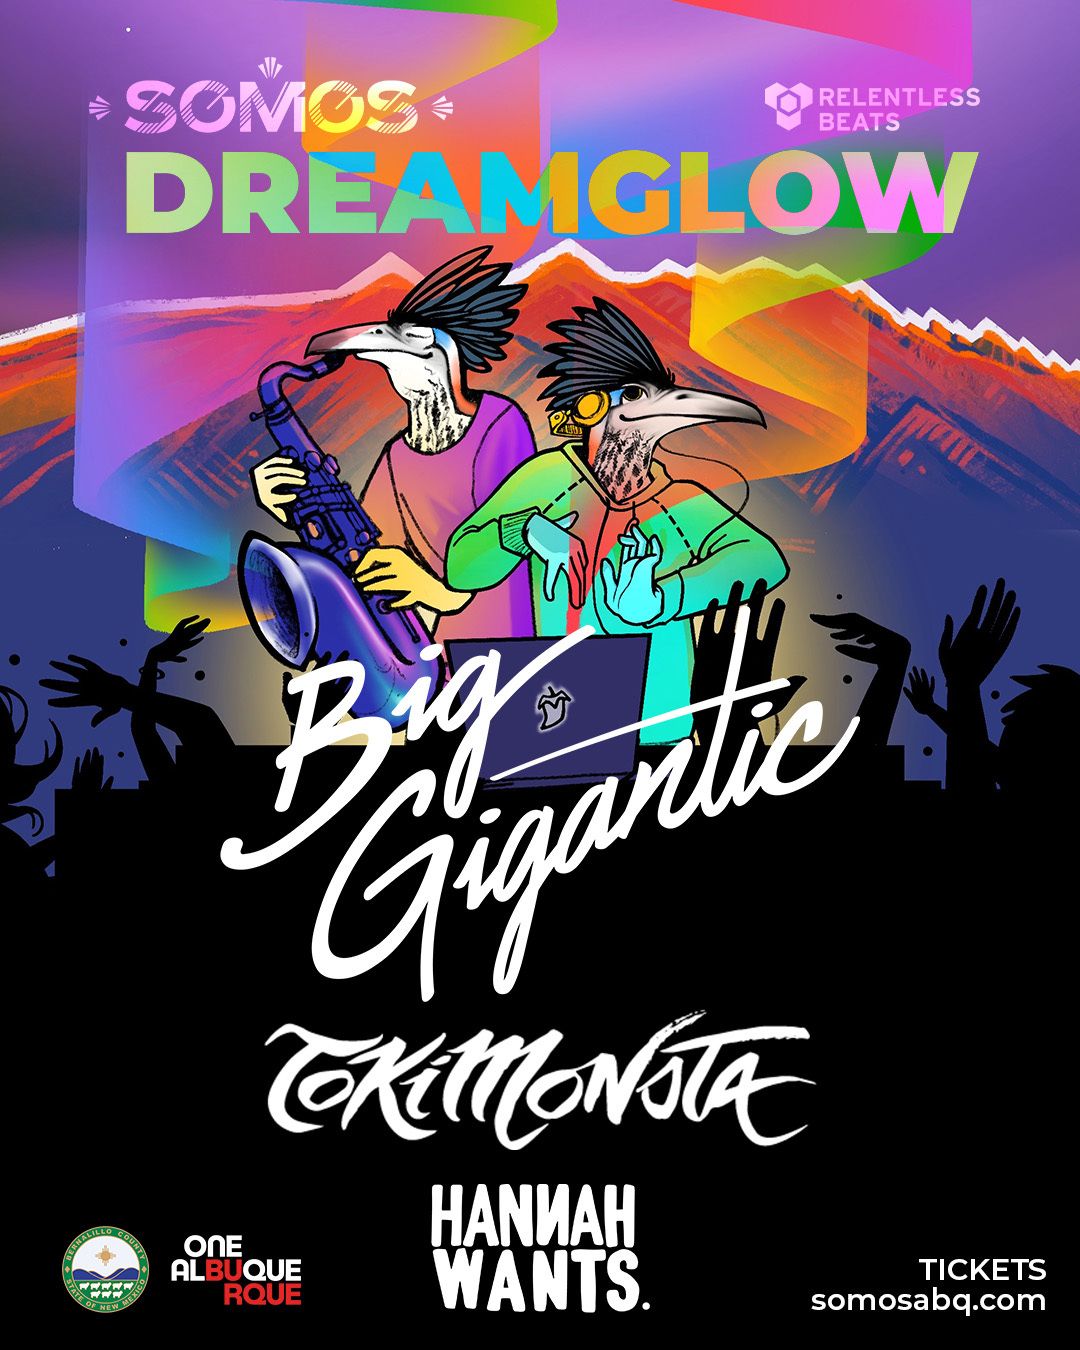 Relentless Beats and SOMOS Albuquerque Presents DREAMGLOW with Big Gigantic, TOKiMONSTA, Hannah Wants, and More